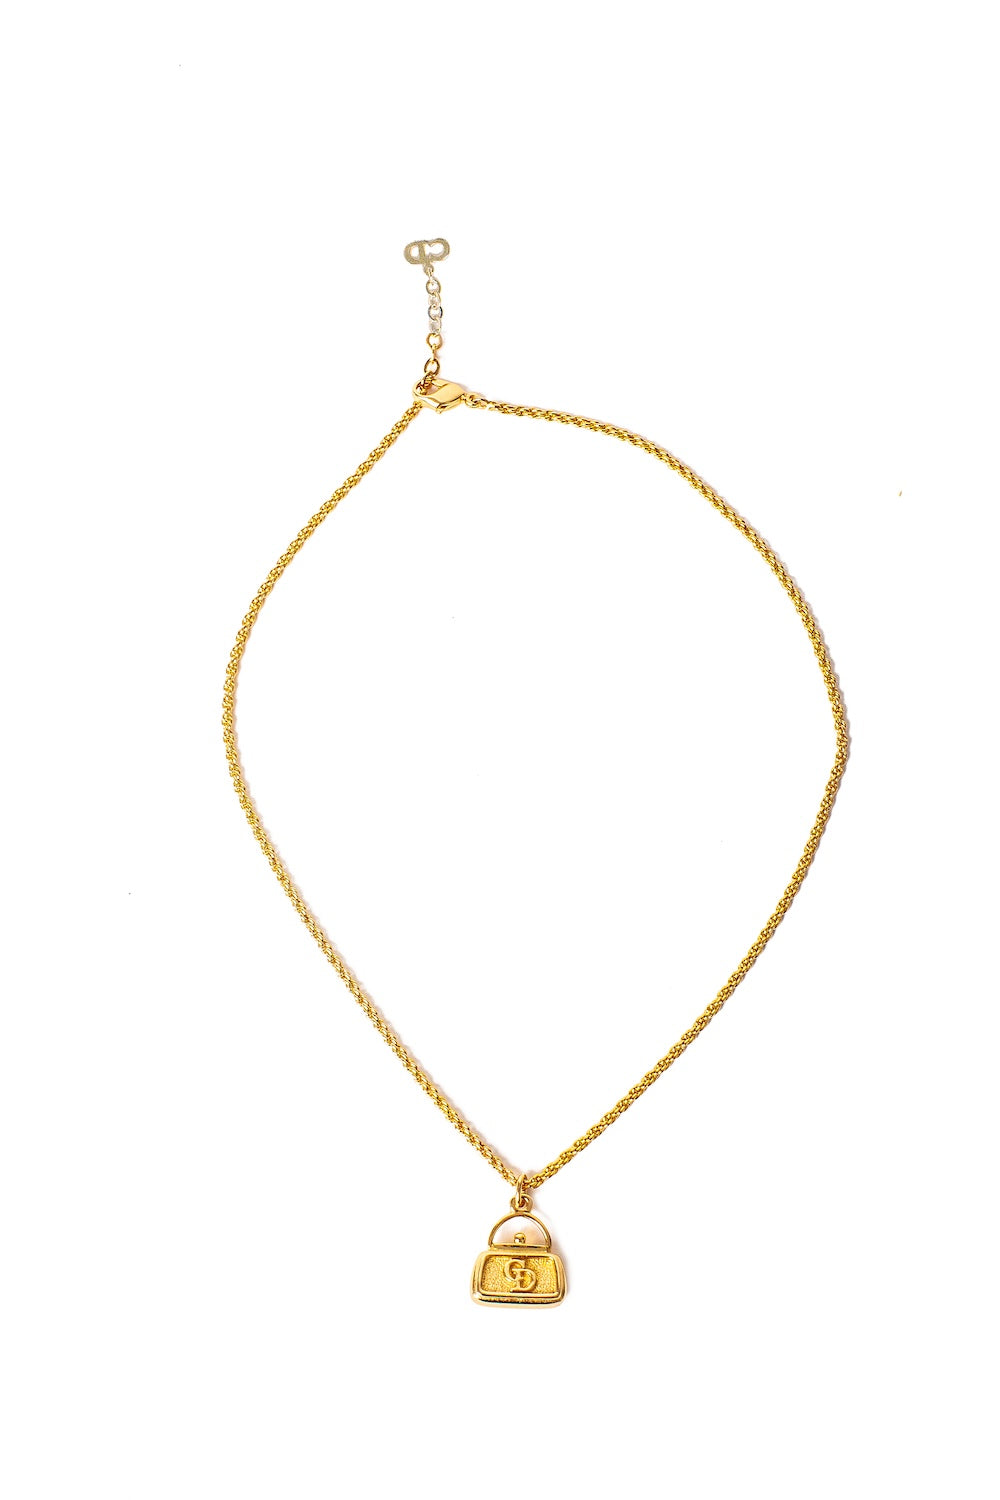 Christian Dior <br> 90's gold shopping bag pendant chain necklace